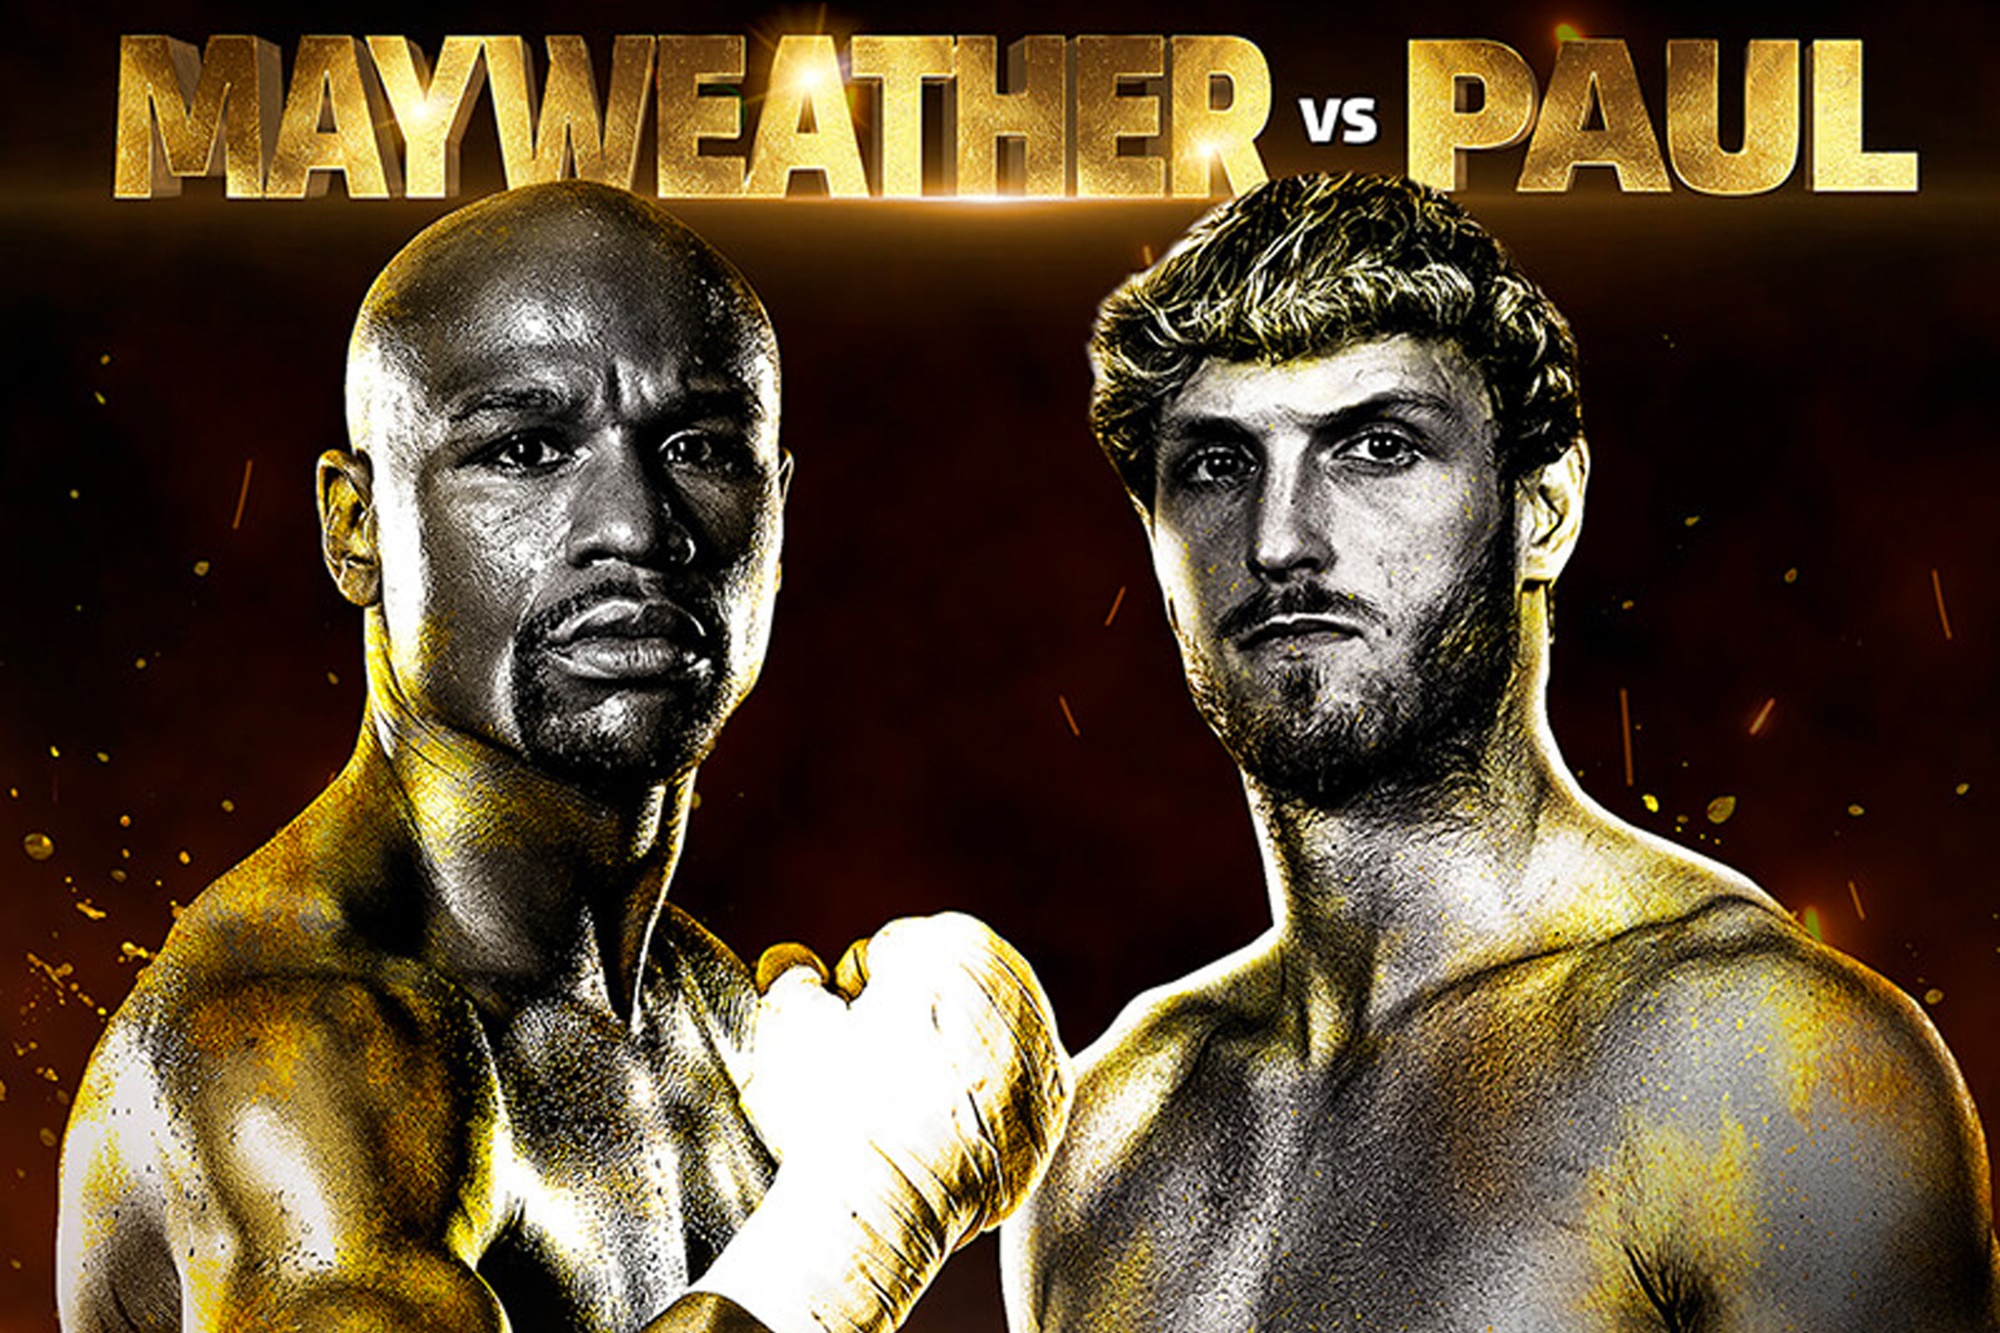 How To Watch Mayweather Vs Paul For Free